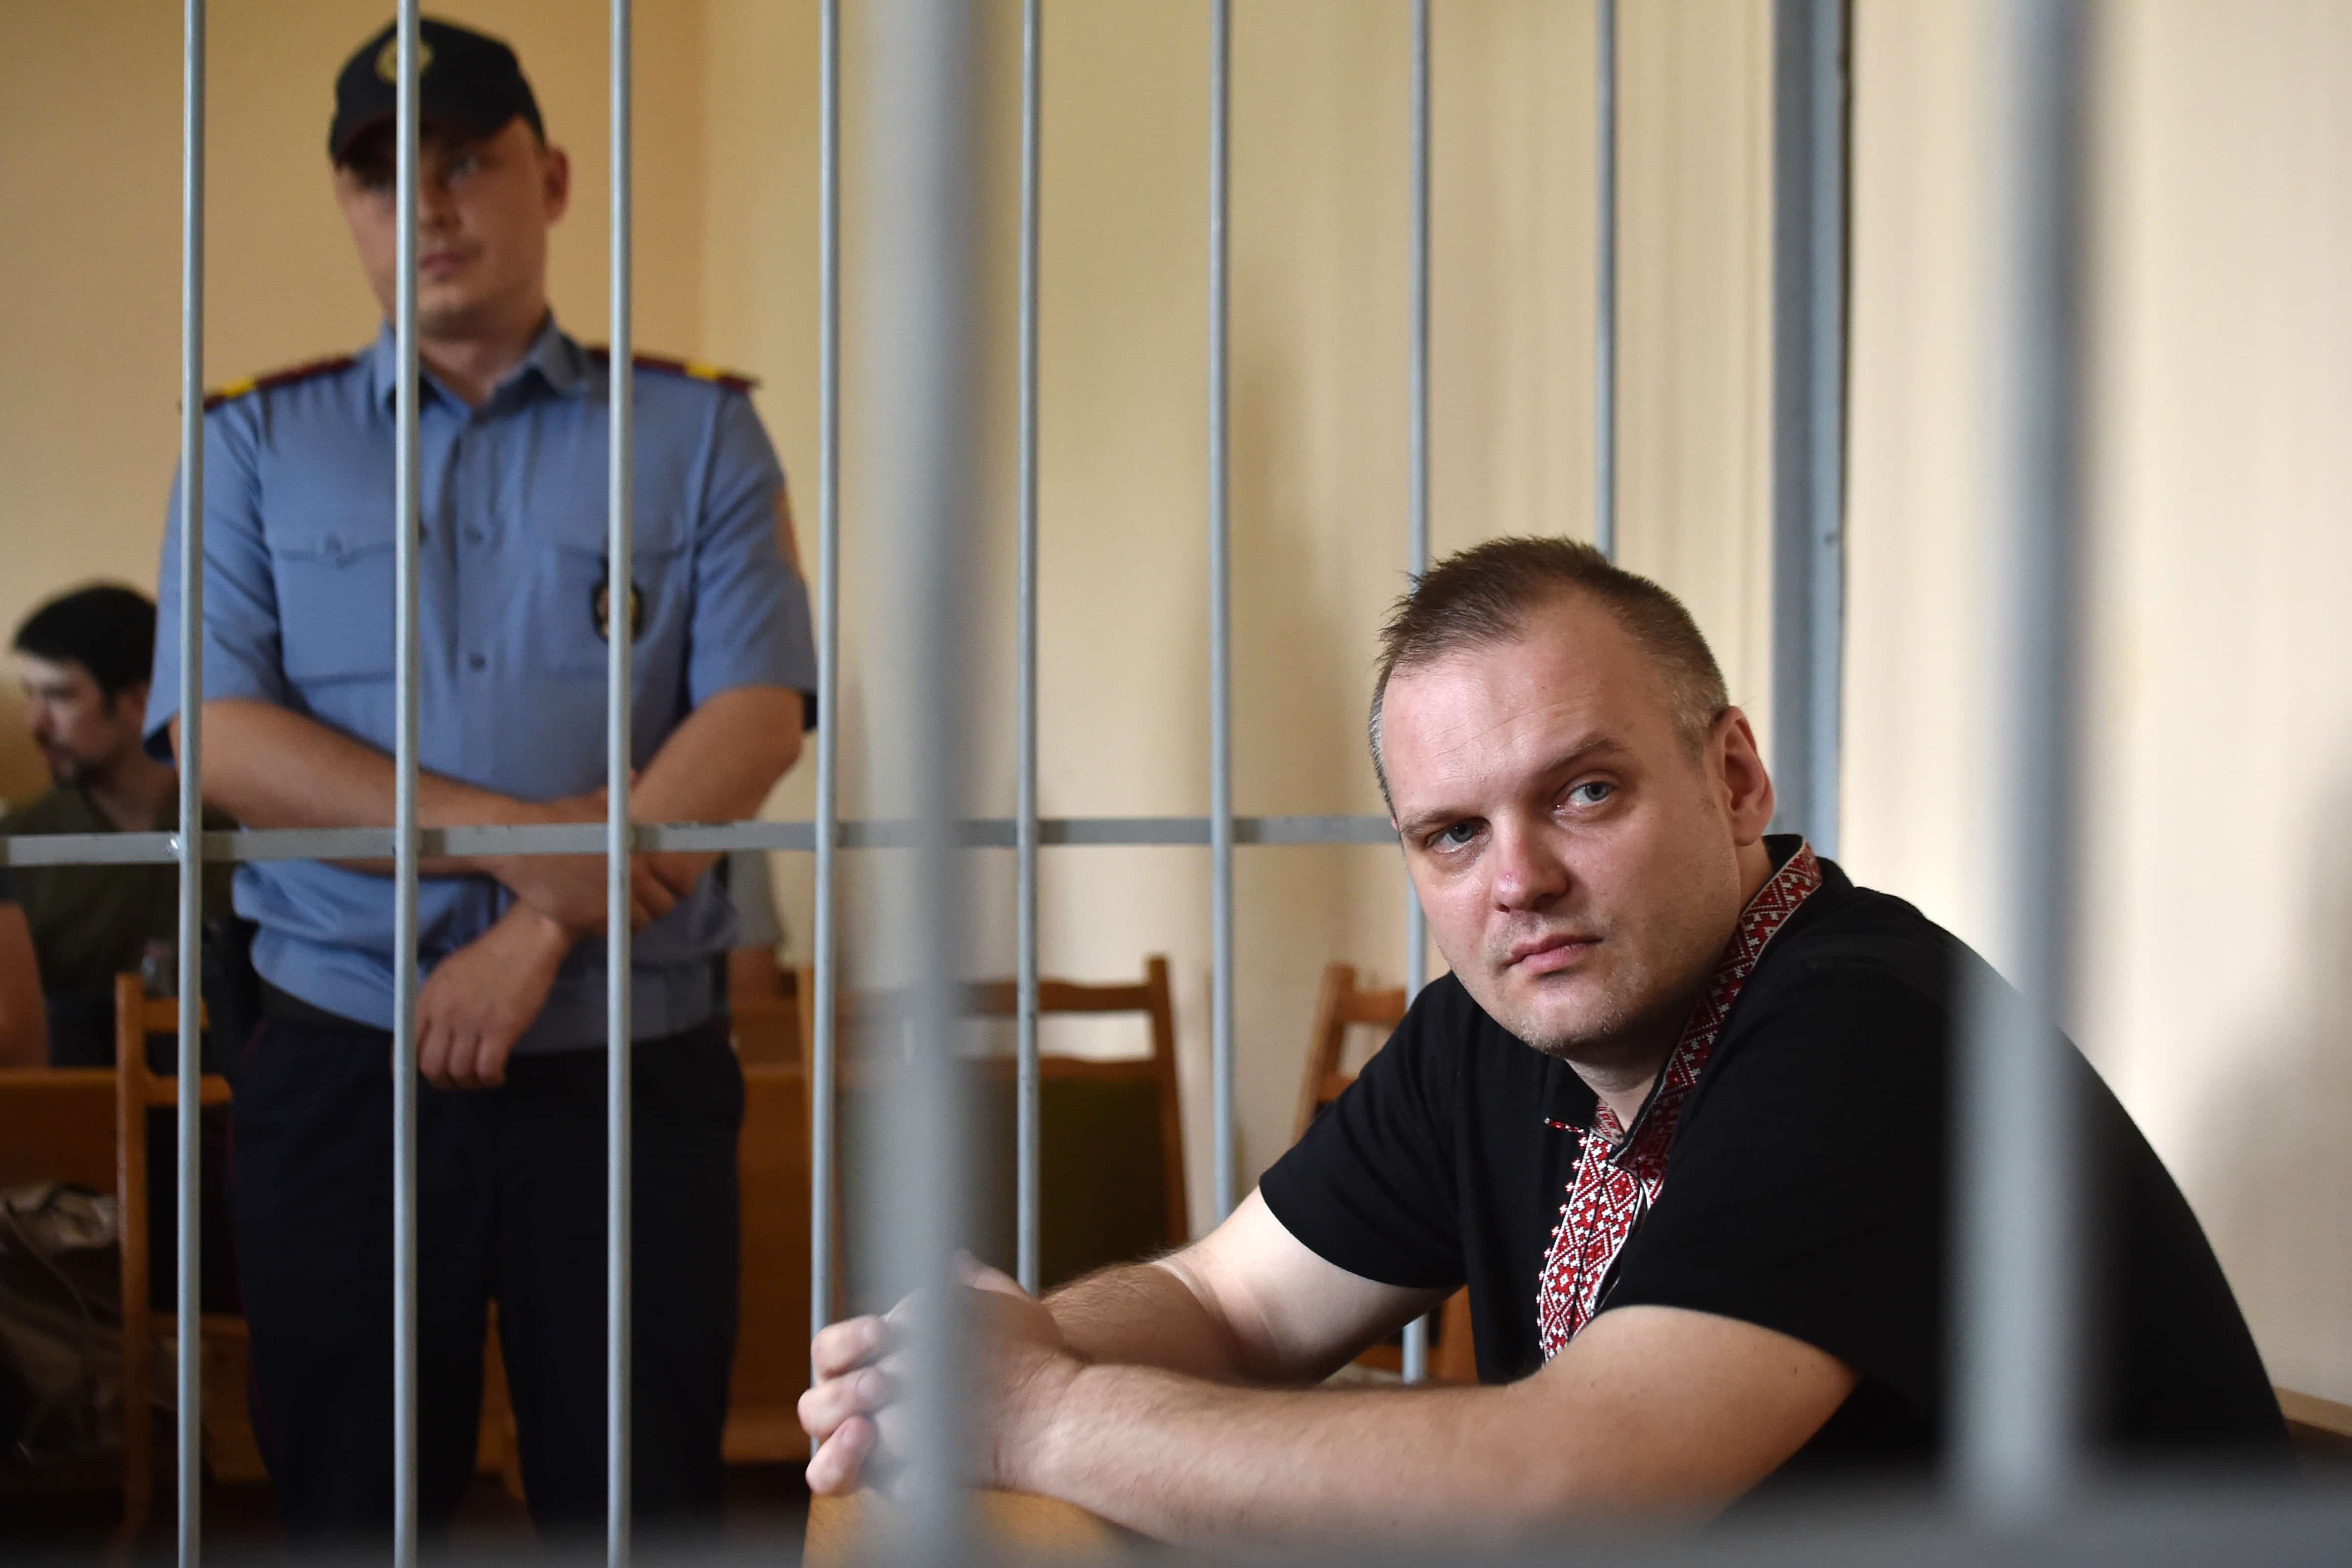 Independent journalist Zmitser Halko looks on as he sits in the defendants' cage on trial for allegidly using force against a police officer , Minsk, Belarus, 2018, SERGEI GAPON/AFP/Getty Images